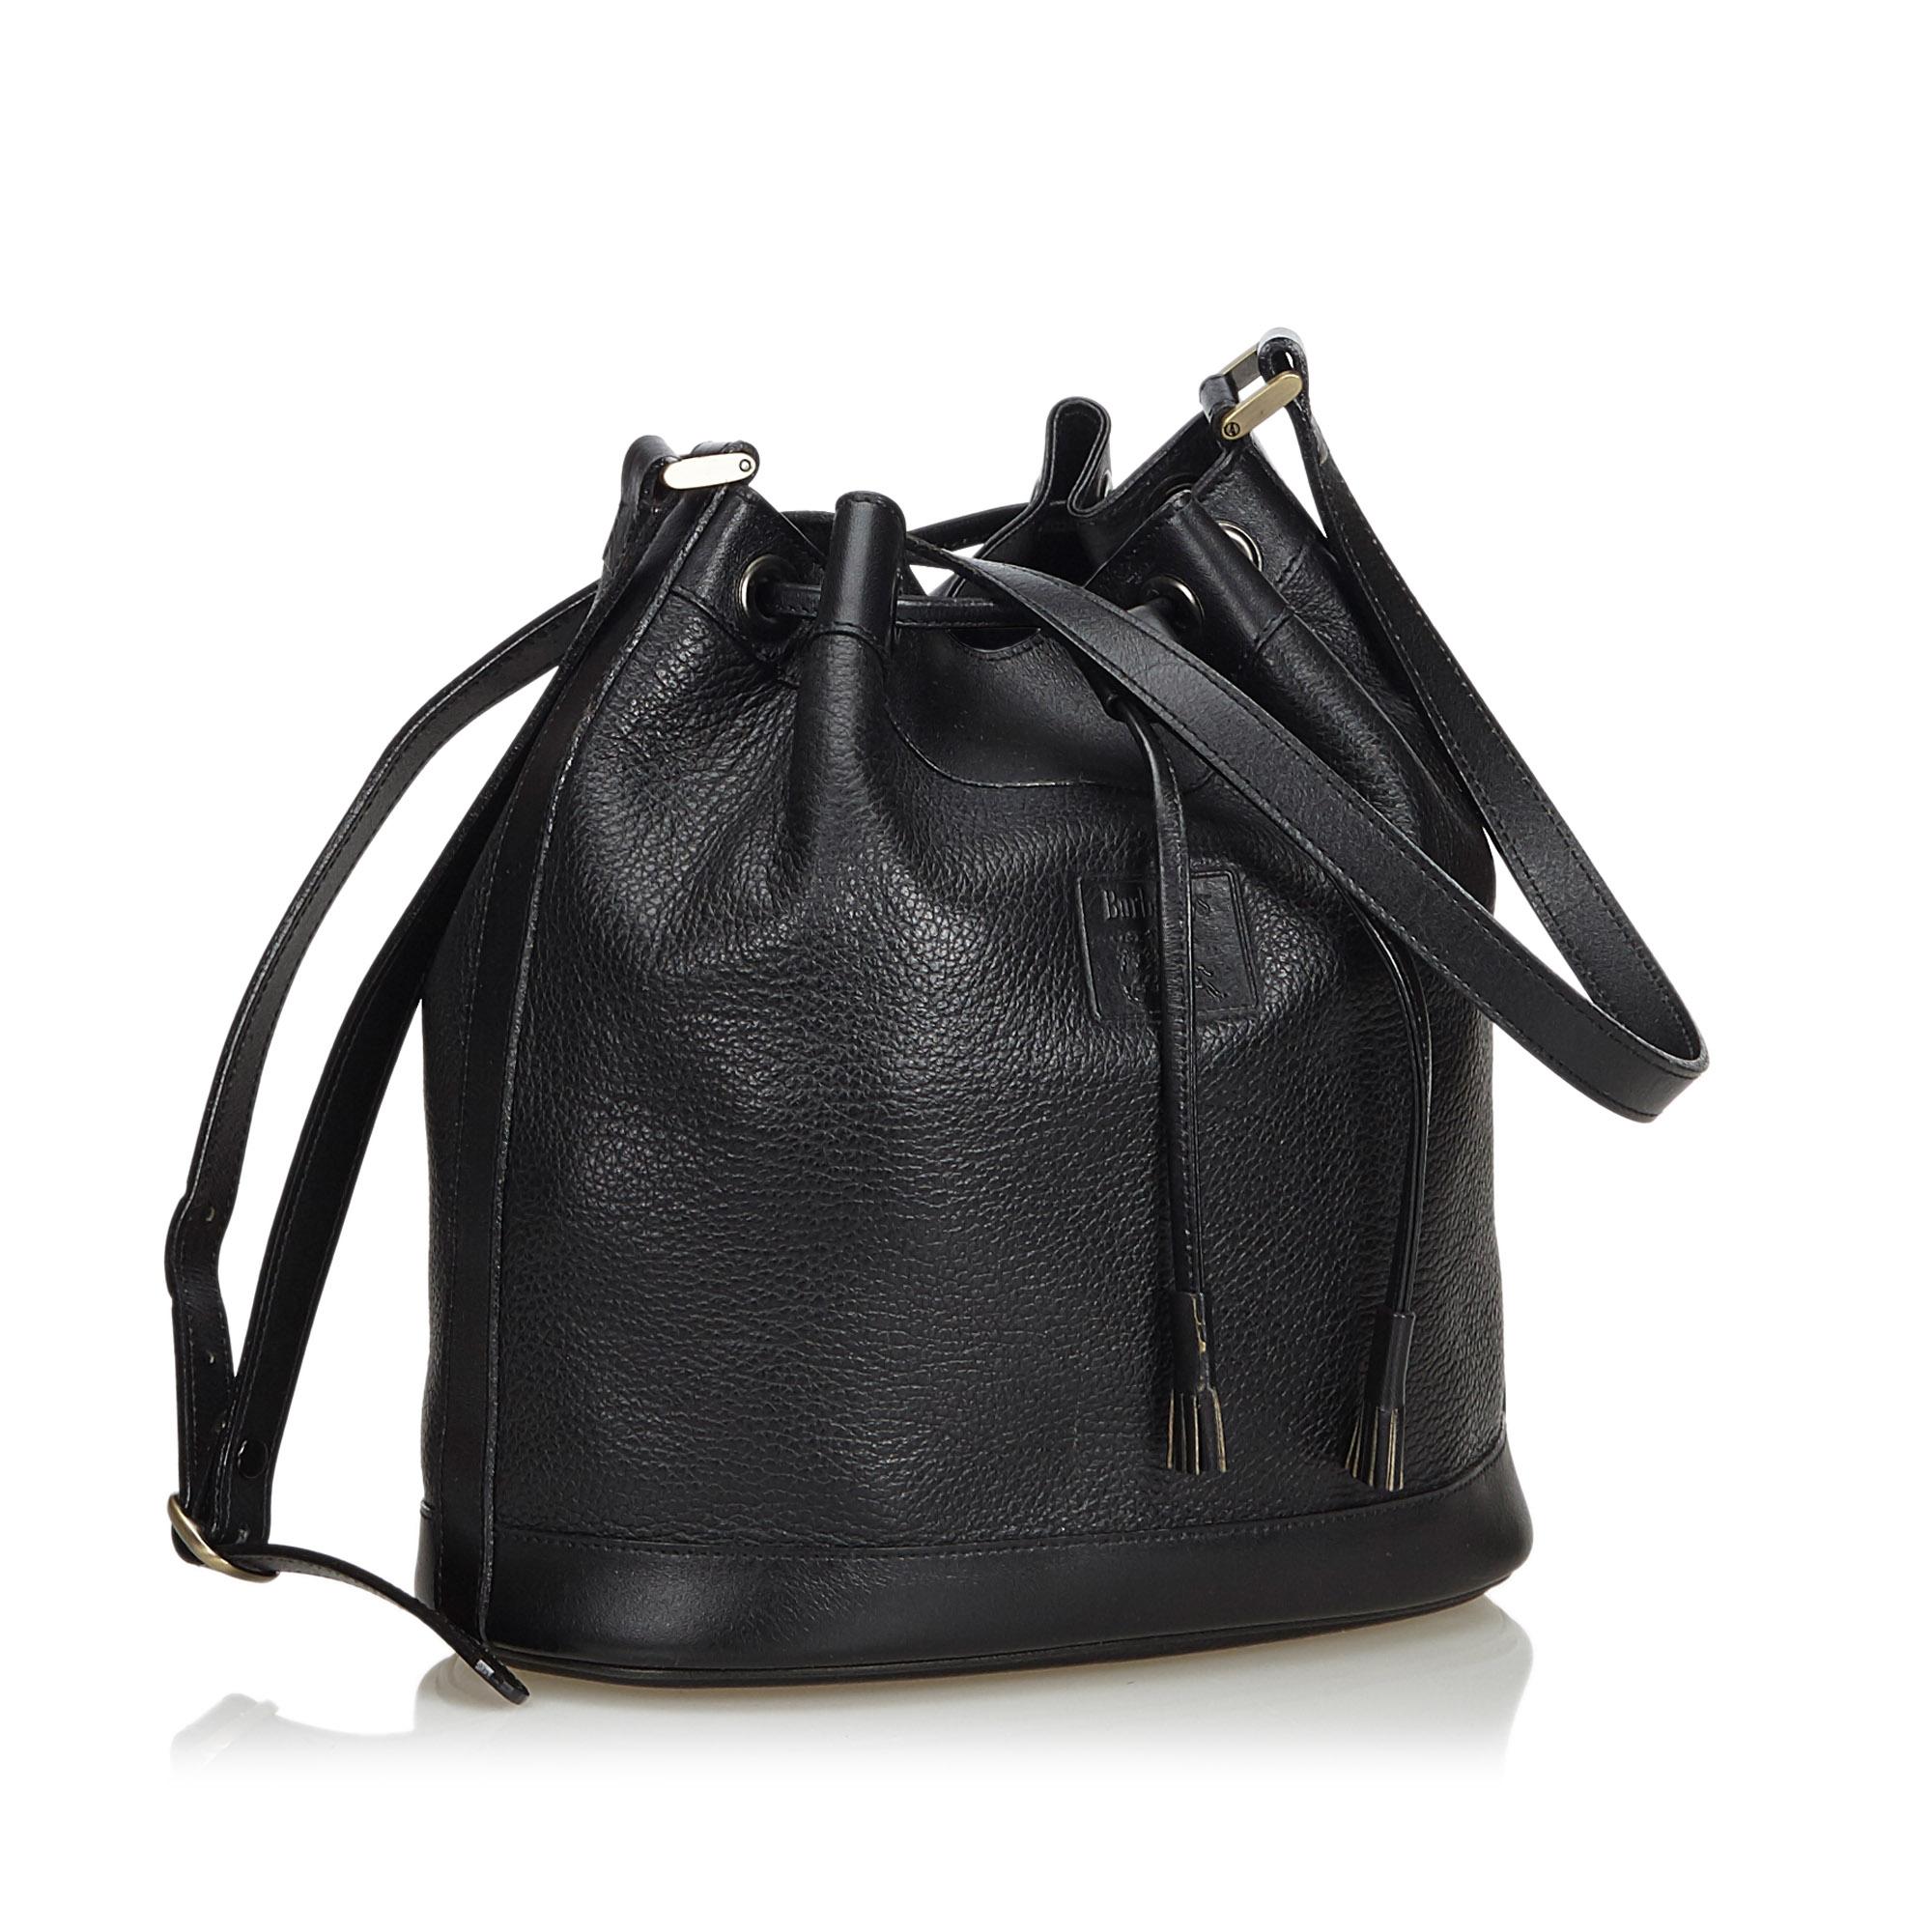 This bucket bag features a leather body, a flat leather strap, a drawstring closure, and interior zip and slip pockets. It carries as B condition rating.

Inclusions: 
This item does not come with inclusions.

Dimensions:
Length: 25.00 cm
Width: